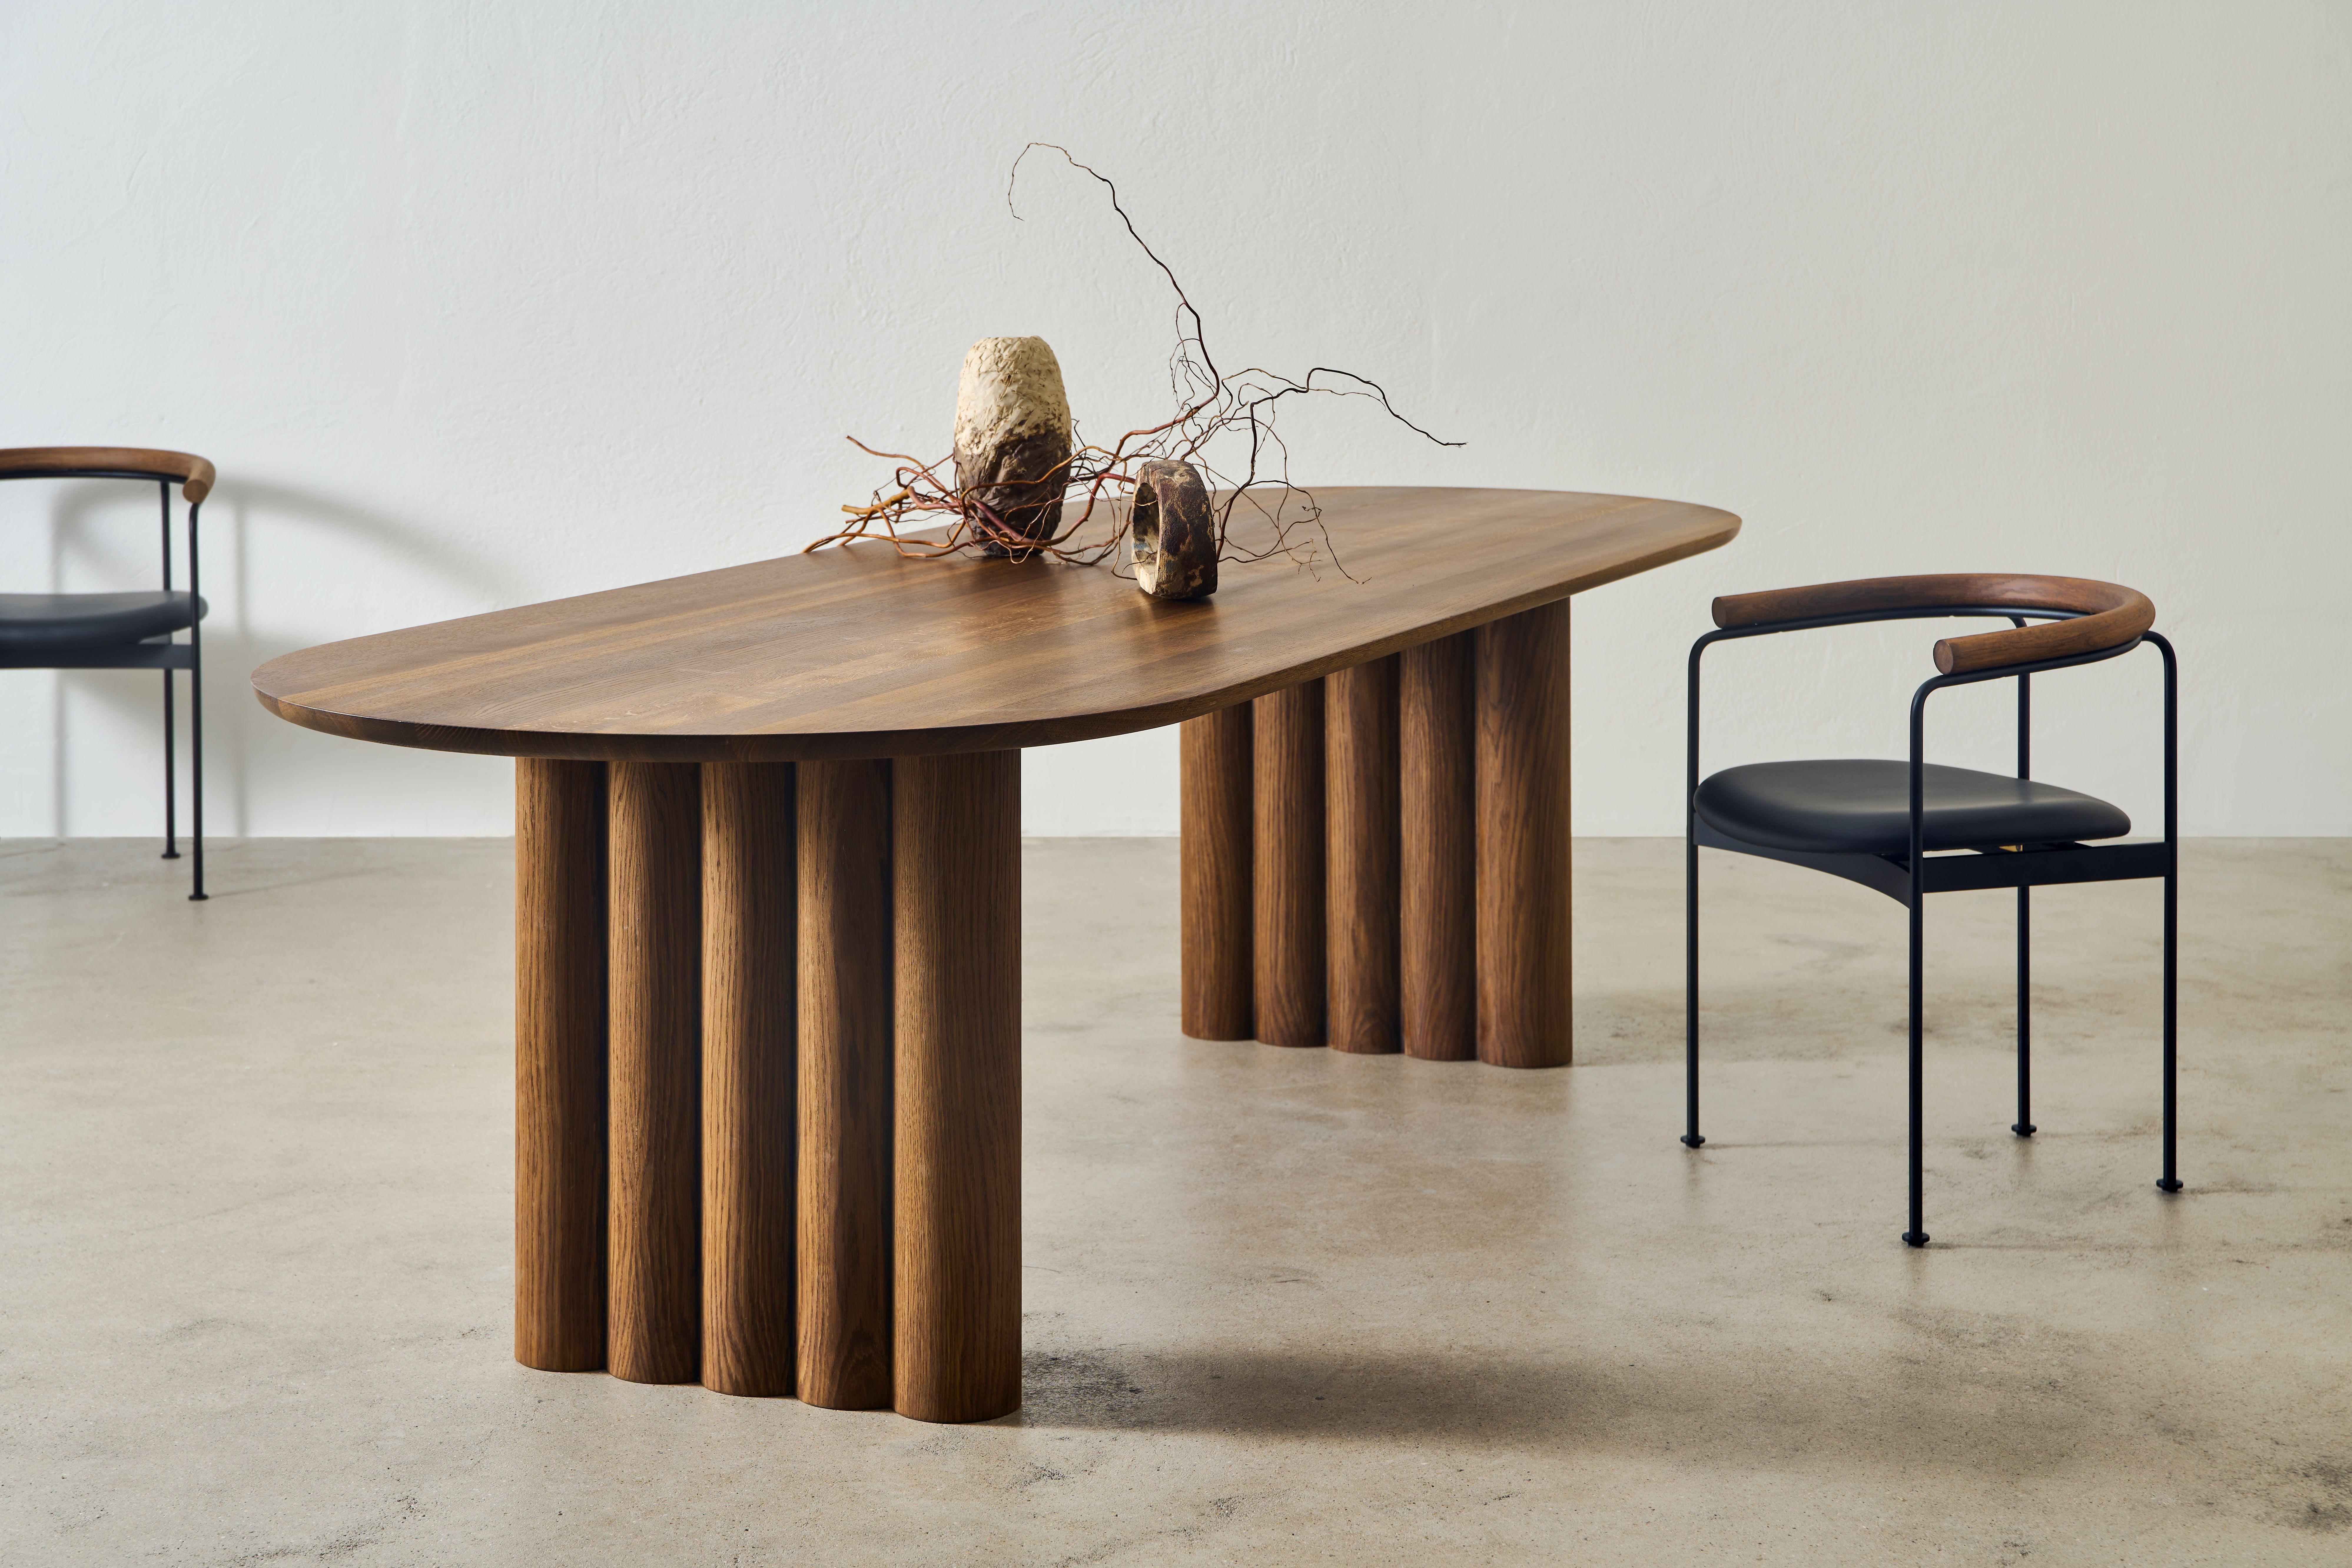 PLUSH dining table, oval, 370 cm.
Solid wood table top and legs. Handmade in Denmark. 
Signed by Jacob Plejdrup for DK3

Table's height: 72 or 74 cm
Table top’s thickness: 40mm
Legs width: 150mm

Table top dimensions:
– 200 x 100 cm
– 240 x 100 cm
–